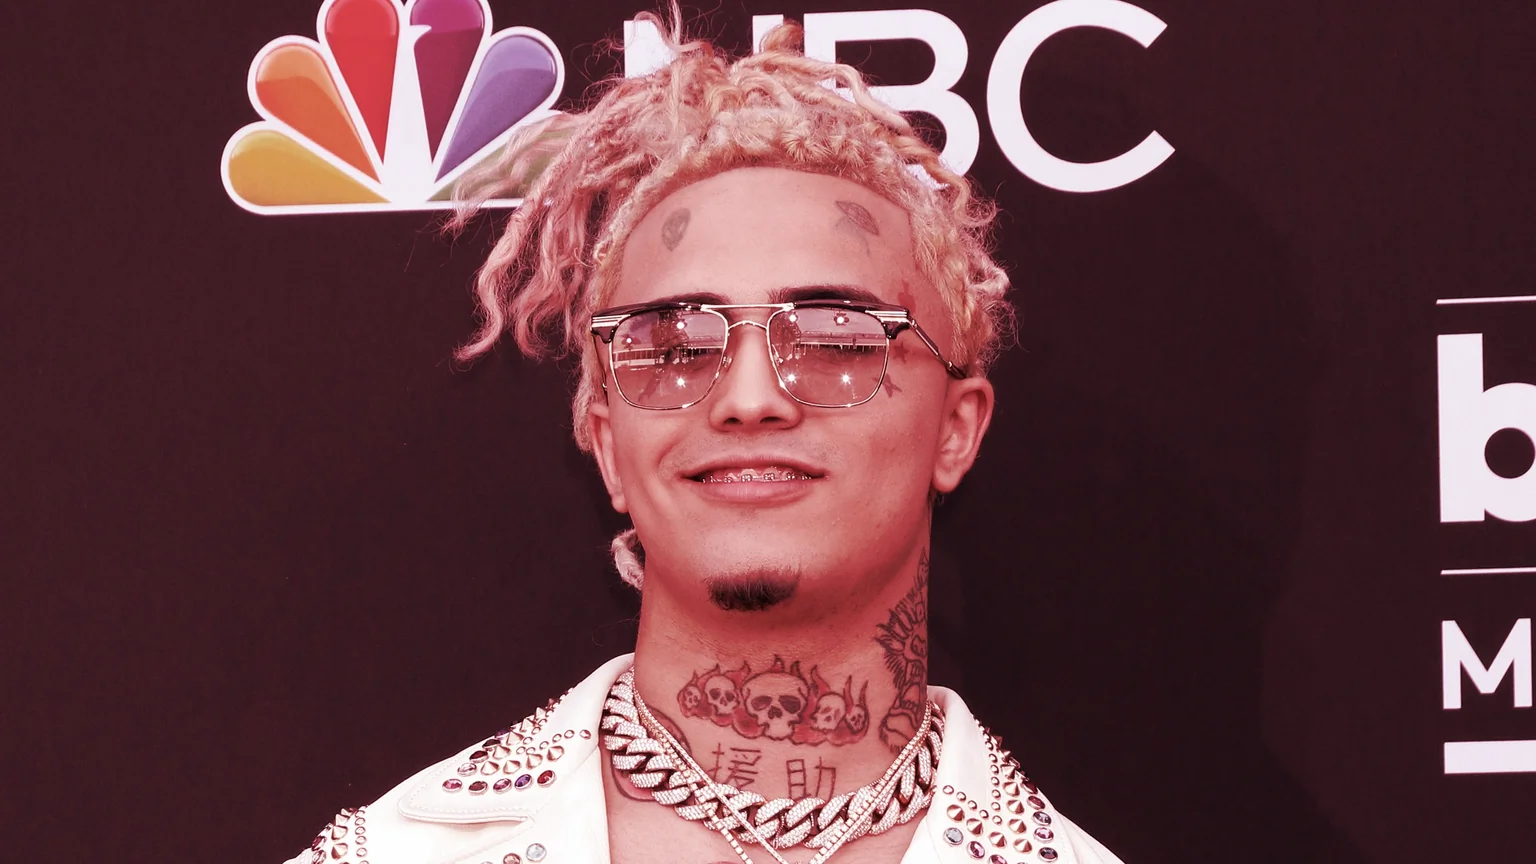 Lil Pump is getting his own cryptocurrency. Image: Shutterstock